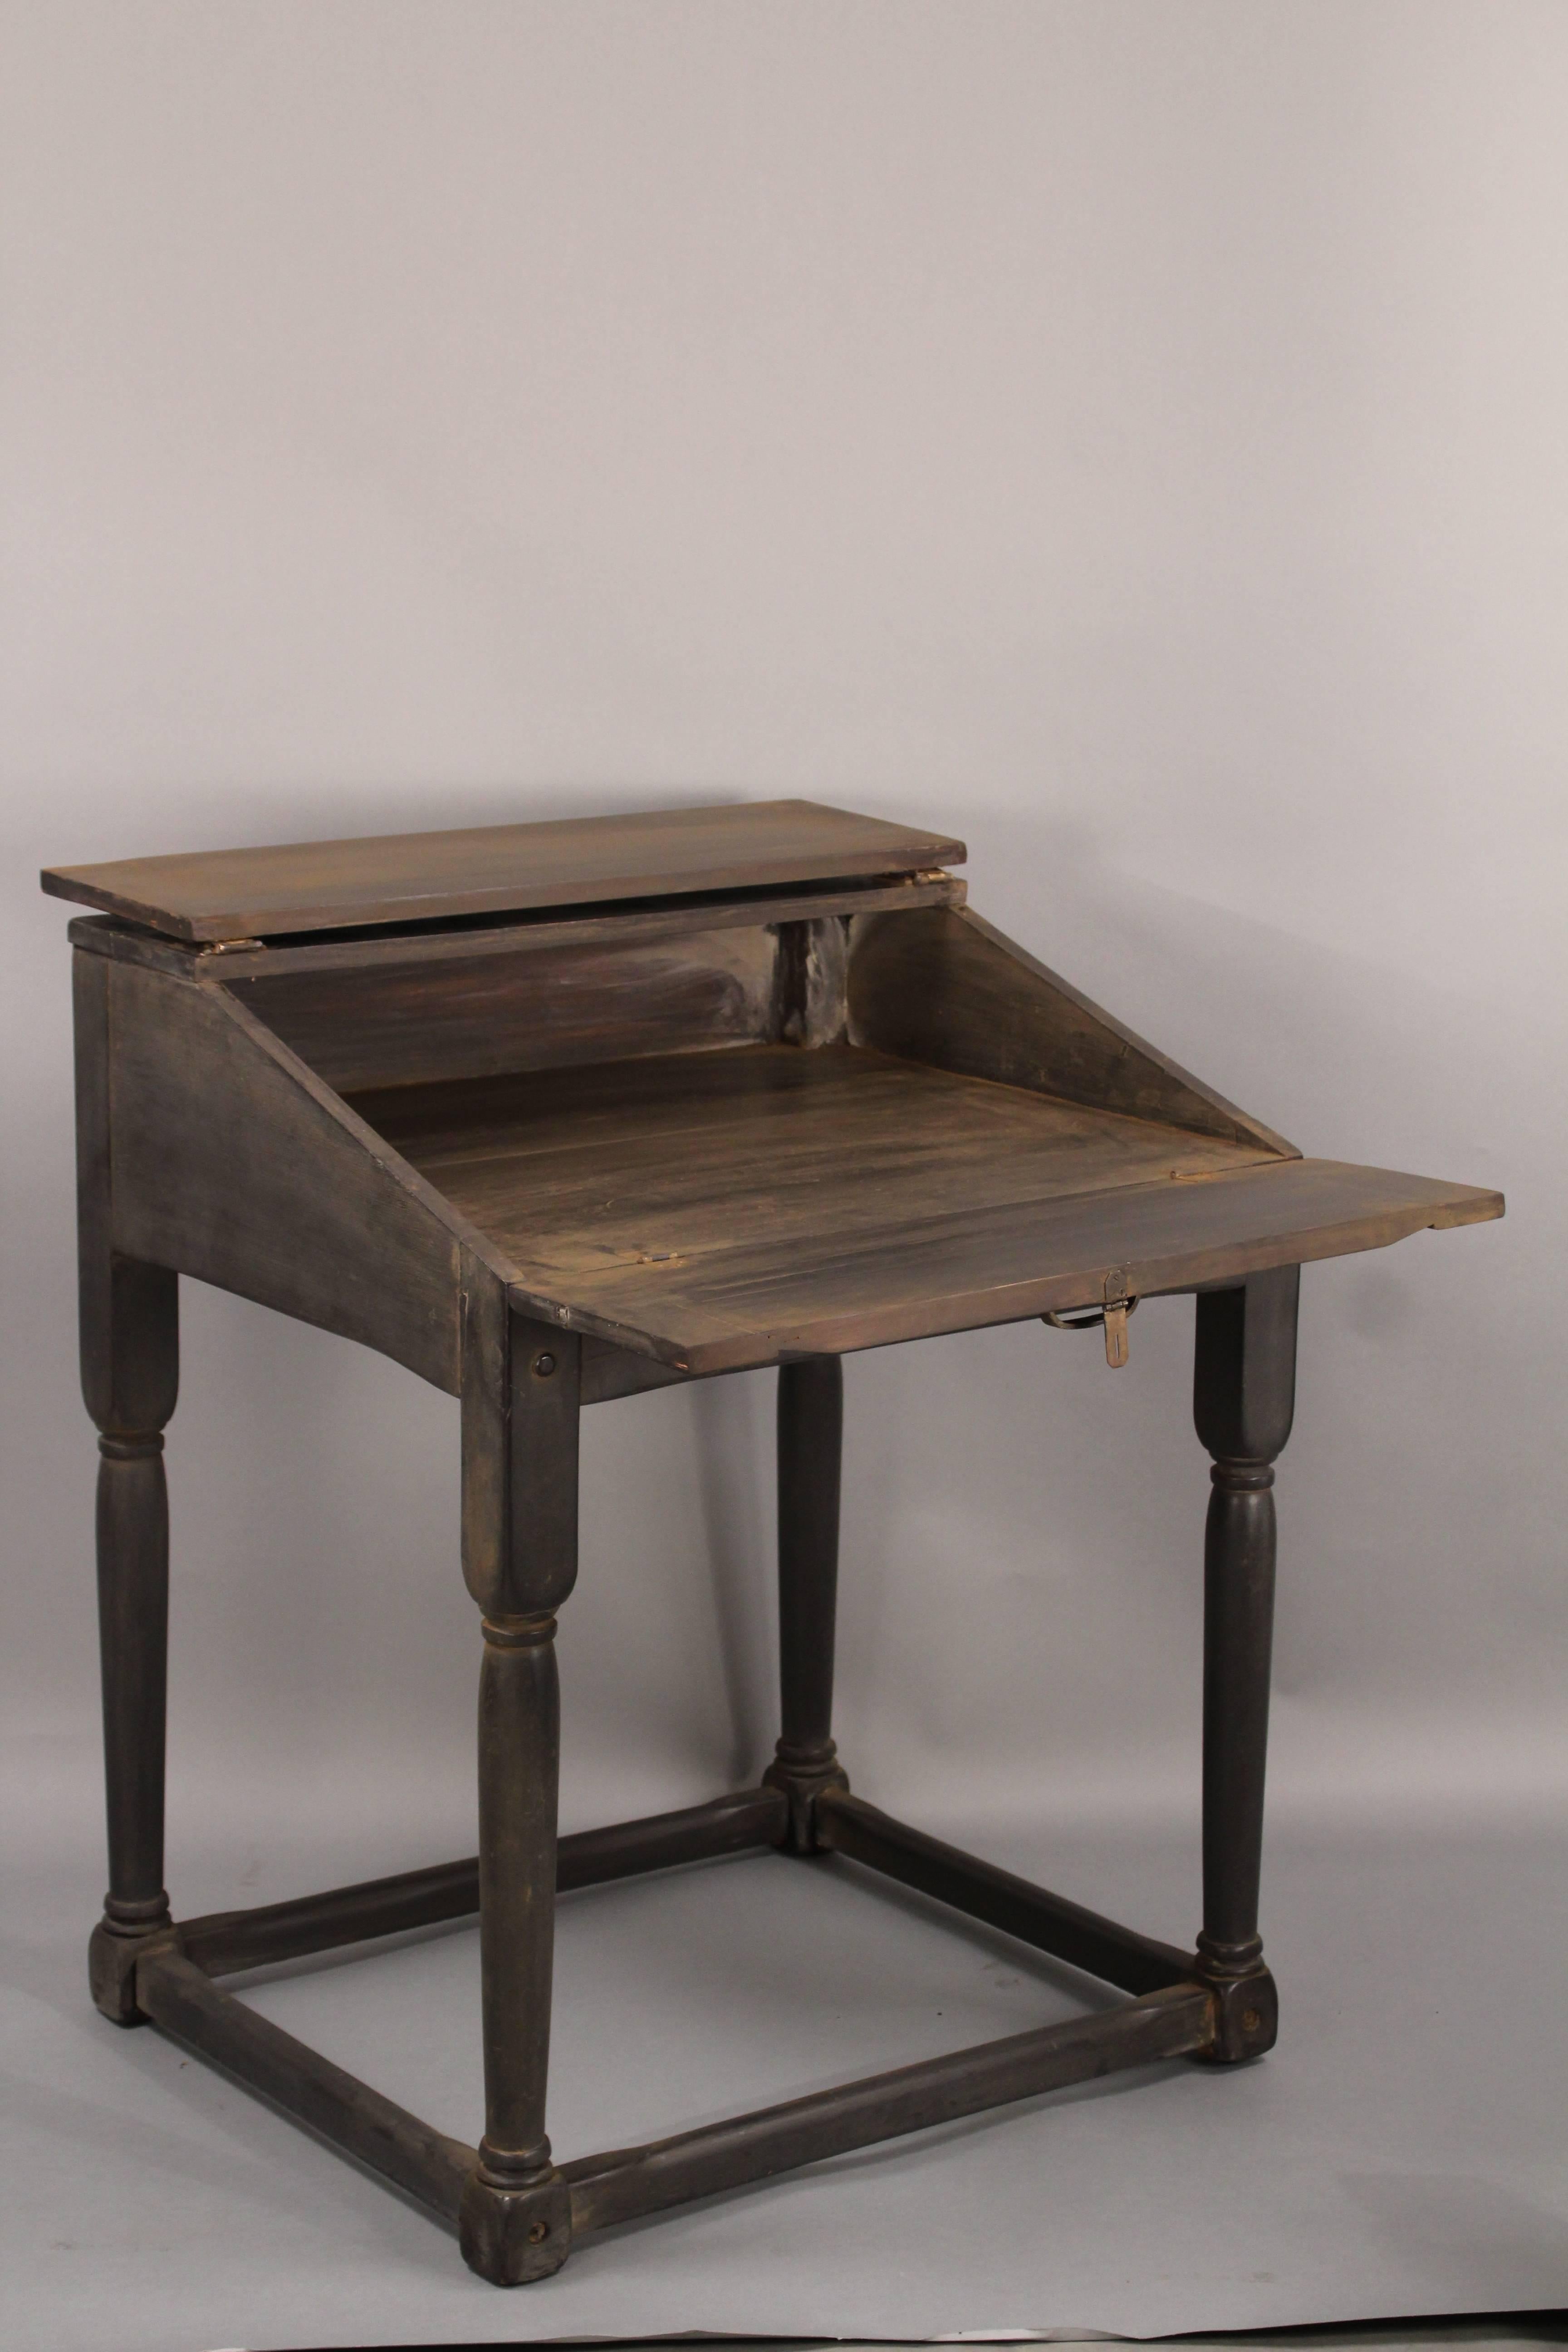 Desk with fold down desk top with original iron hardware. Restored finish. Measure: 37